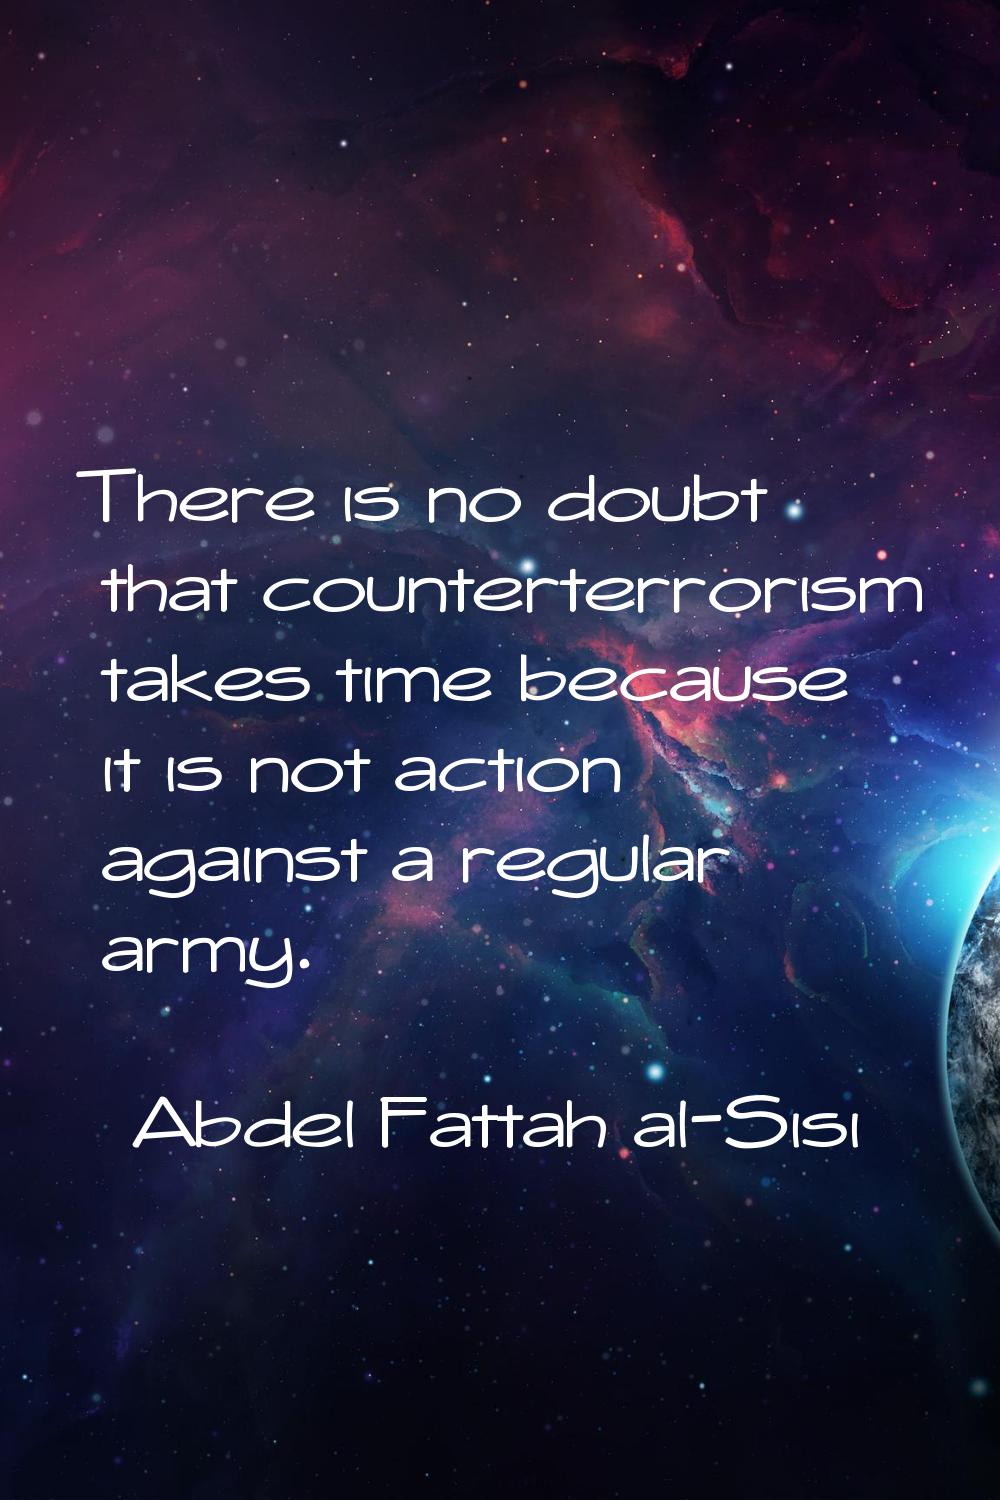 There is no doubt that counterterrorism takes time because it is not action against a regular army.